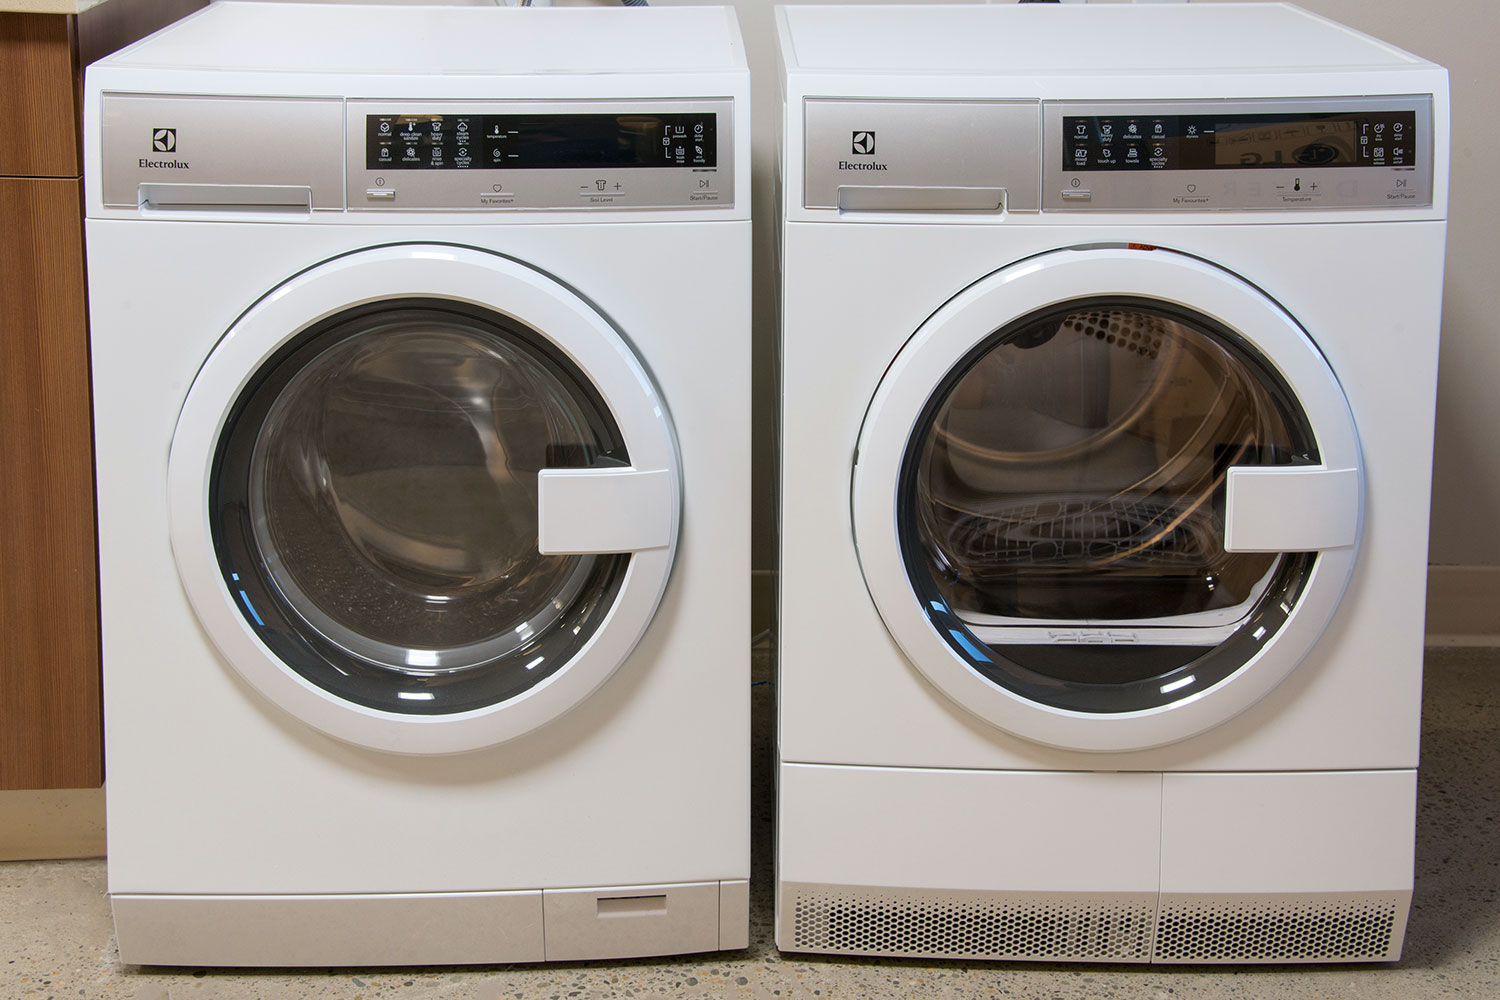 Electrolux EIFLS20QSW 24-Inch Compact Washer Review